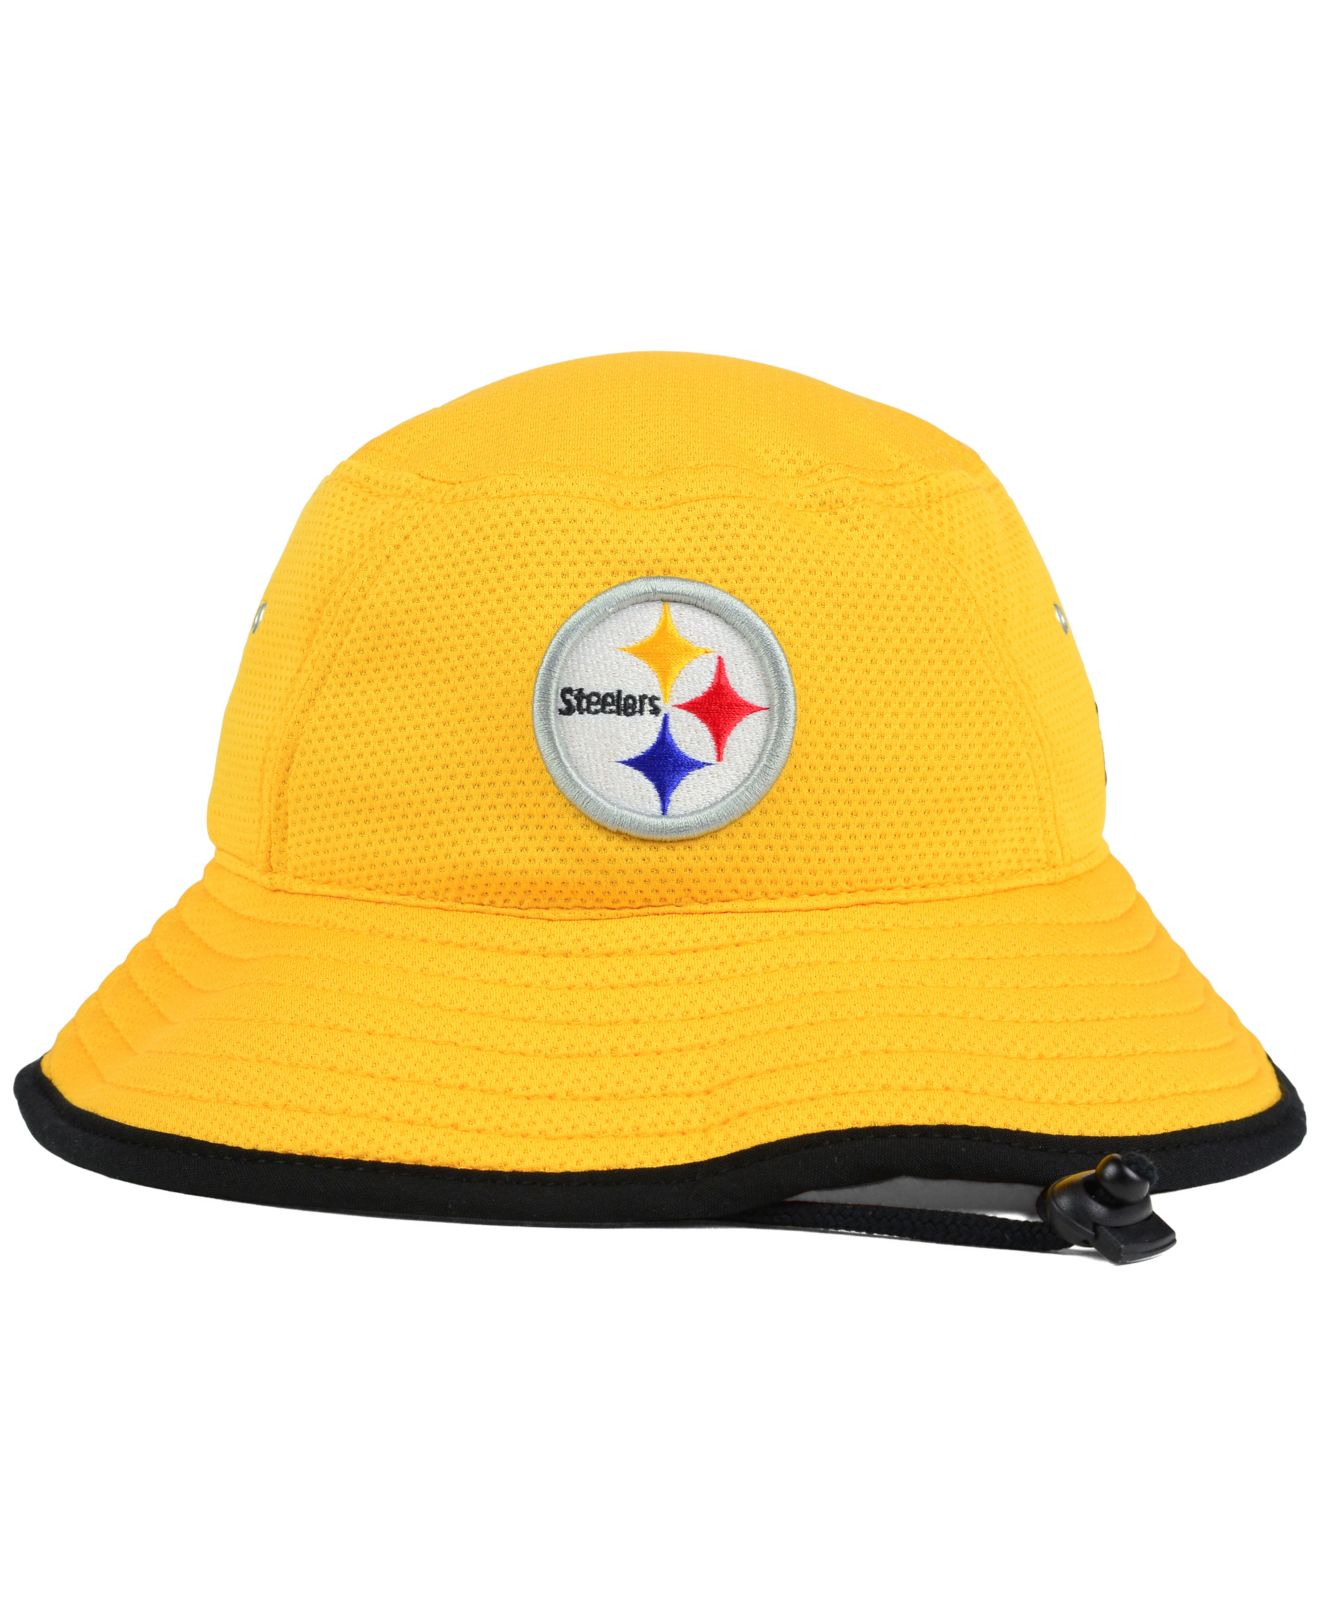 steelers training camp hat